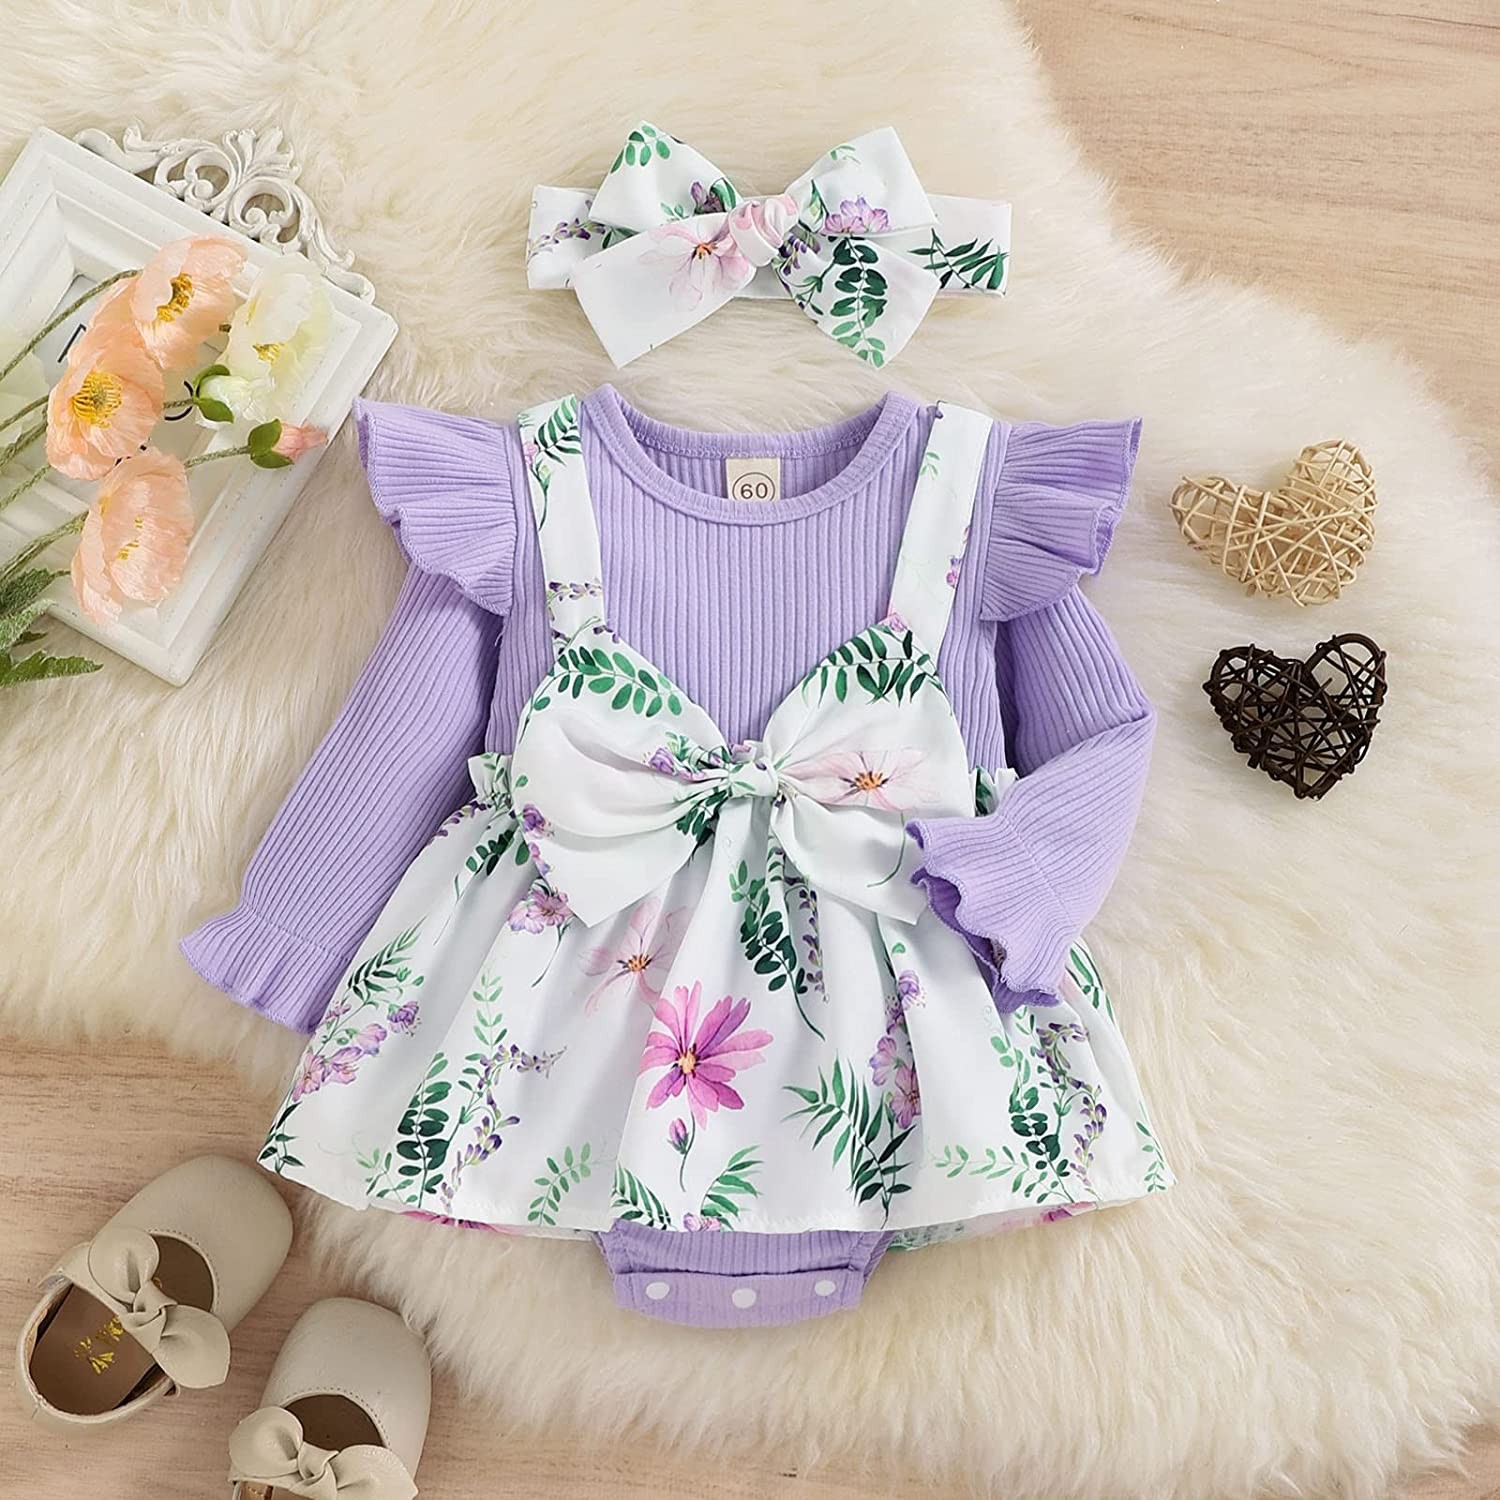 Jdefeg Clothes for Baby Girl Summer Skirts Tops Sleeve Floral Clothes Dress  Toddler 3Pcs Ruffle Girl Headband Set Girls Outfits&Set Girls Size 10